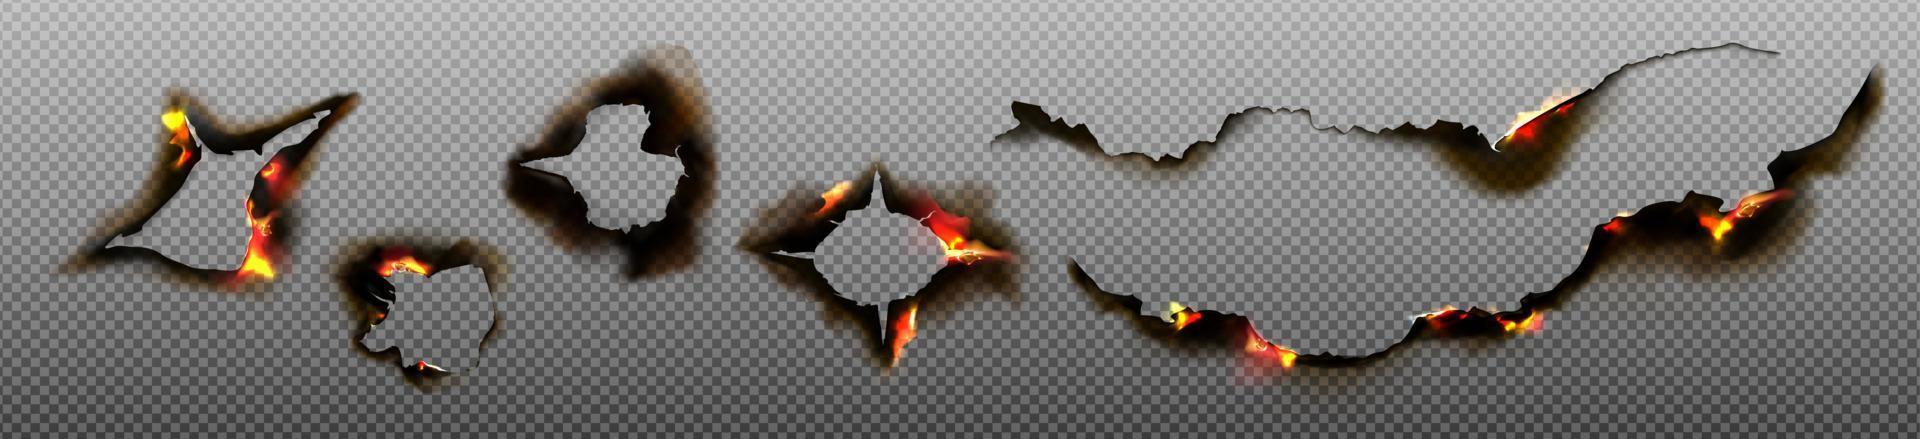 Burn paper holes and borders, burnt pages set vector